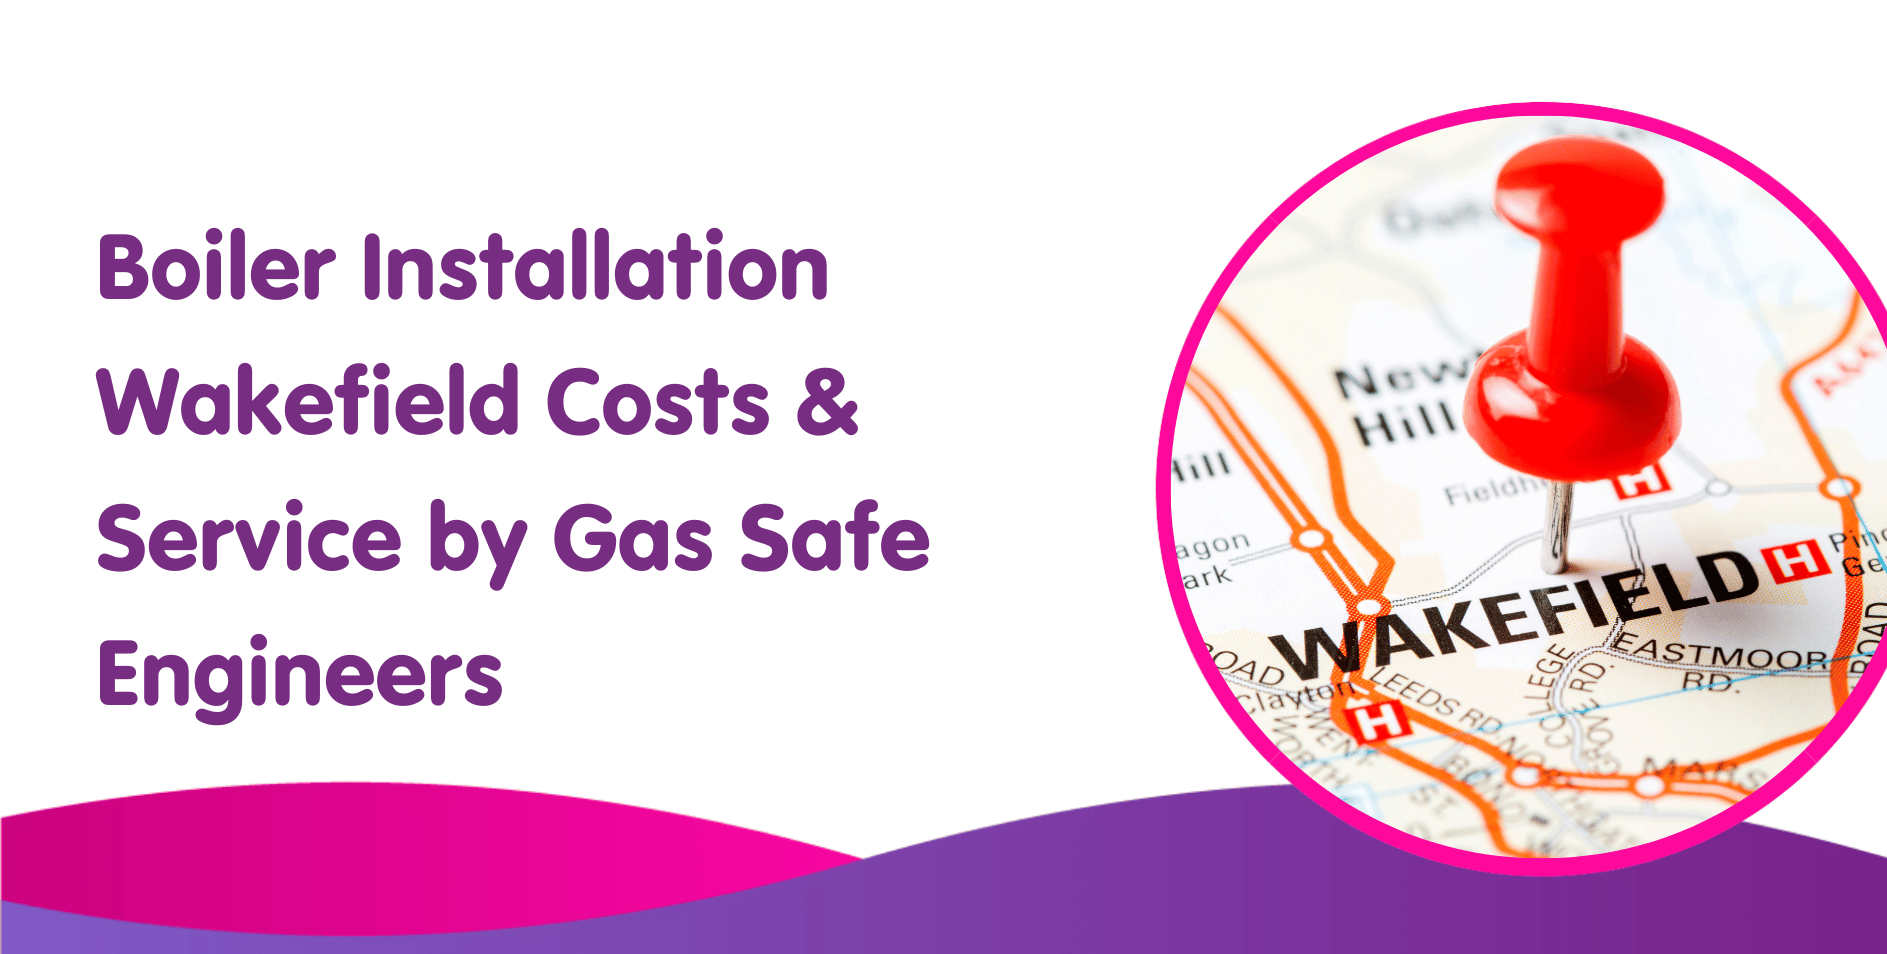 Boiler Installation Wakefield Costs & Service by Gas Safe Engineers